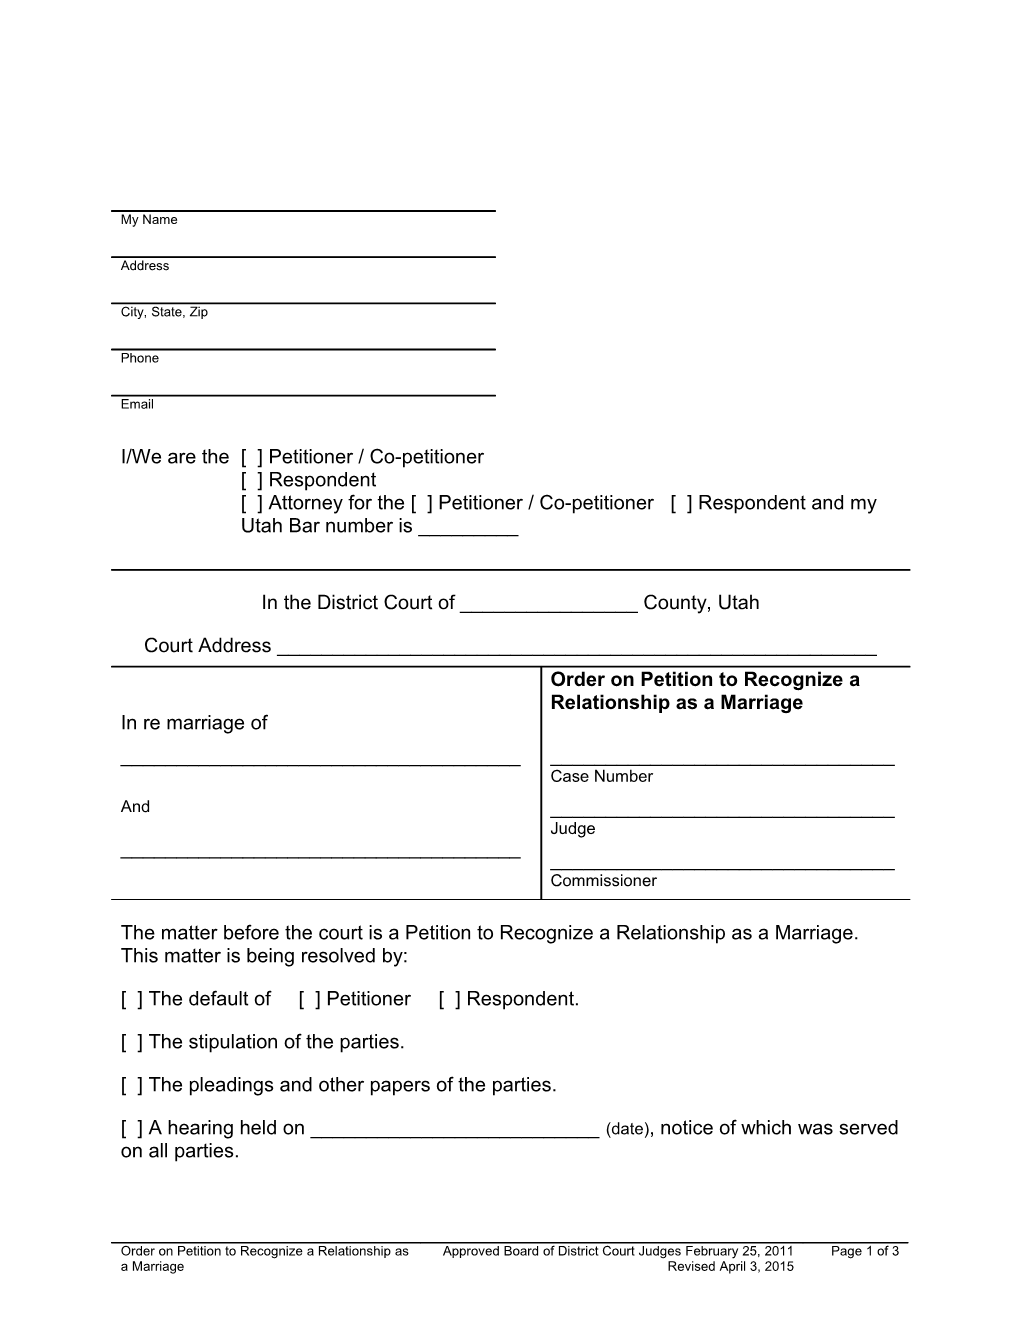 Order on Petition to Recognize a Relationship As a Marriage